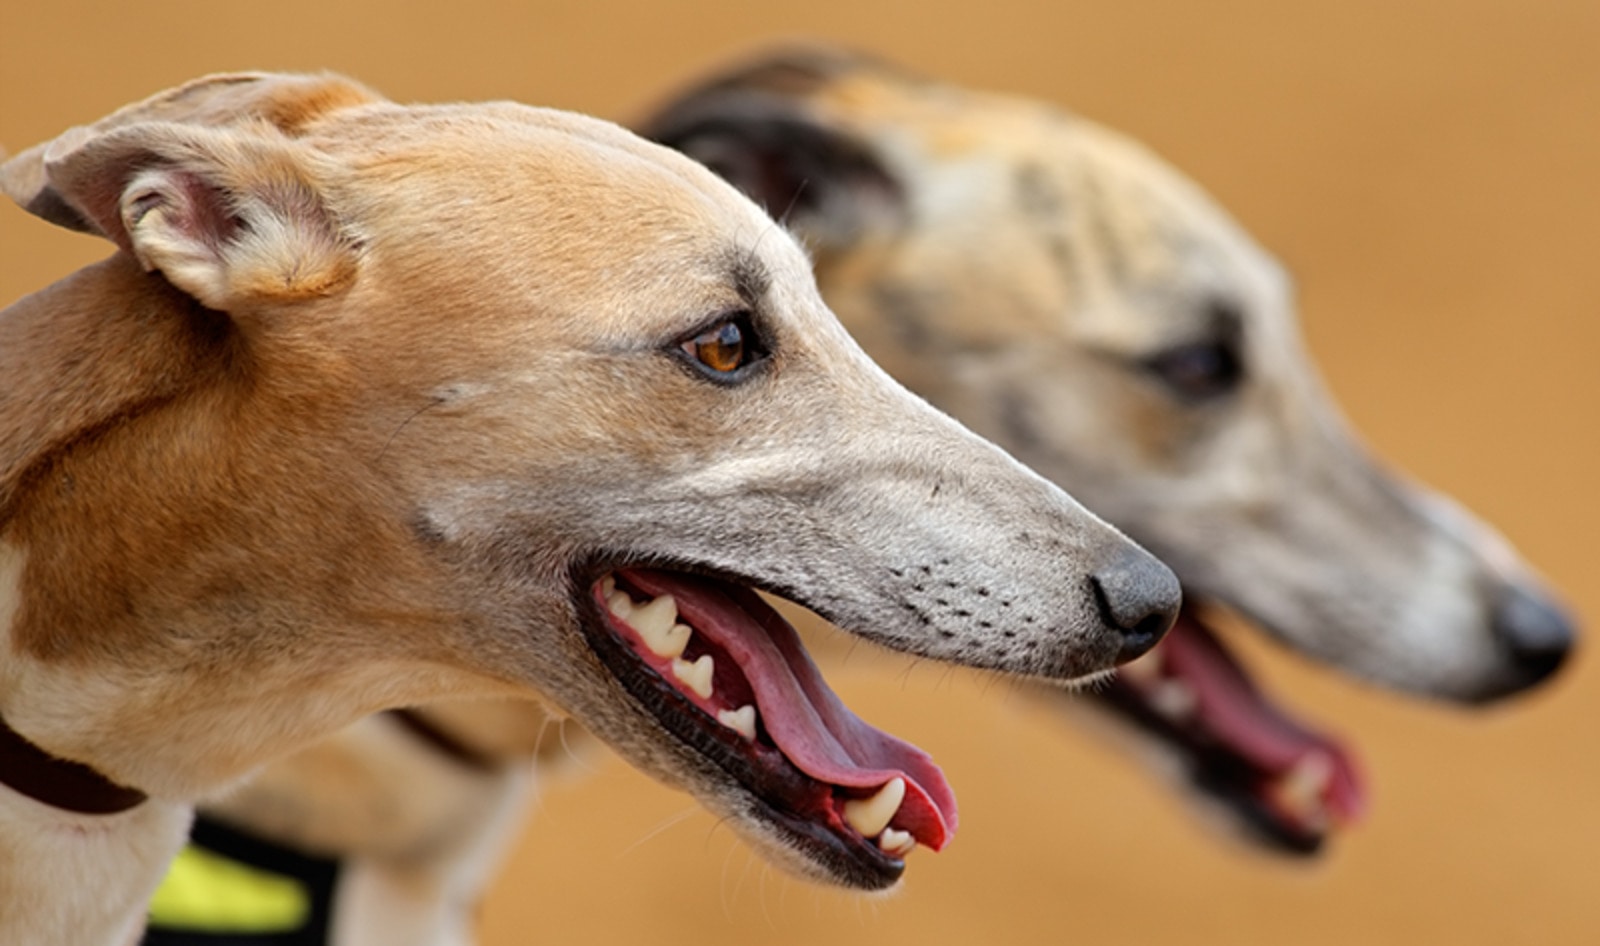 Arkansas to End Greyhound Racing by 2022